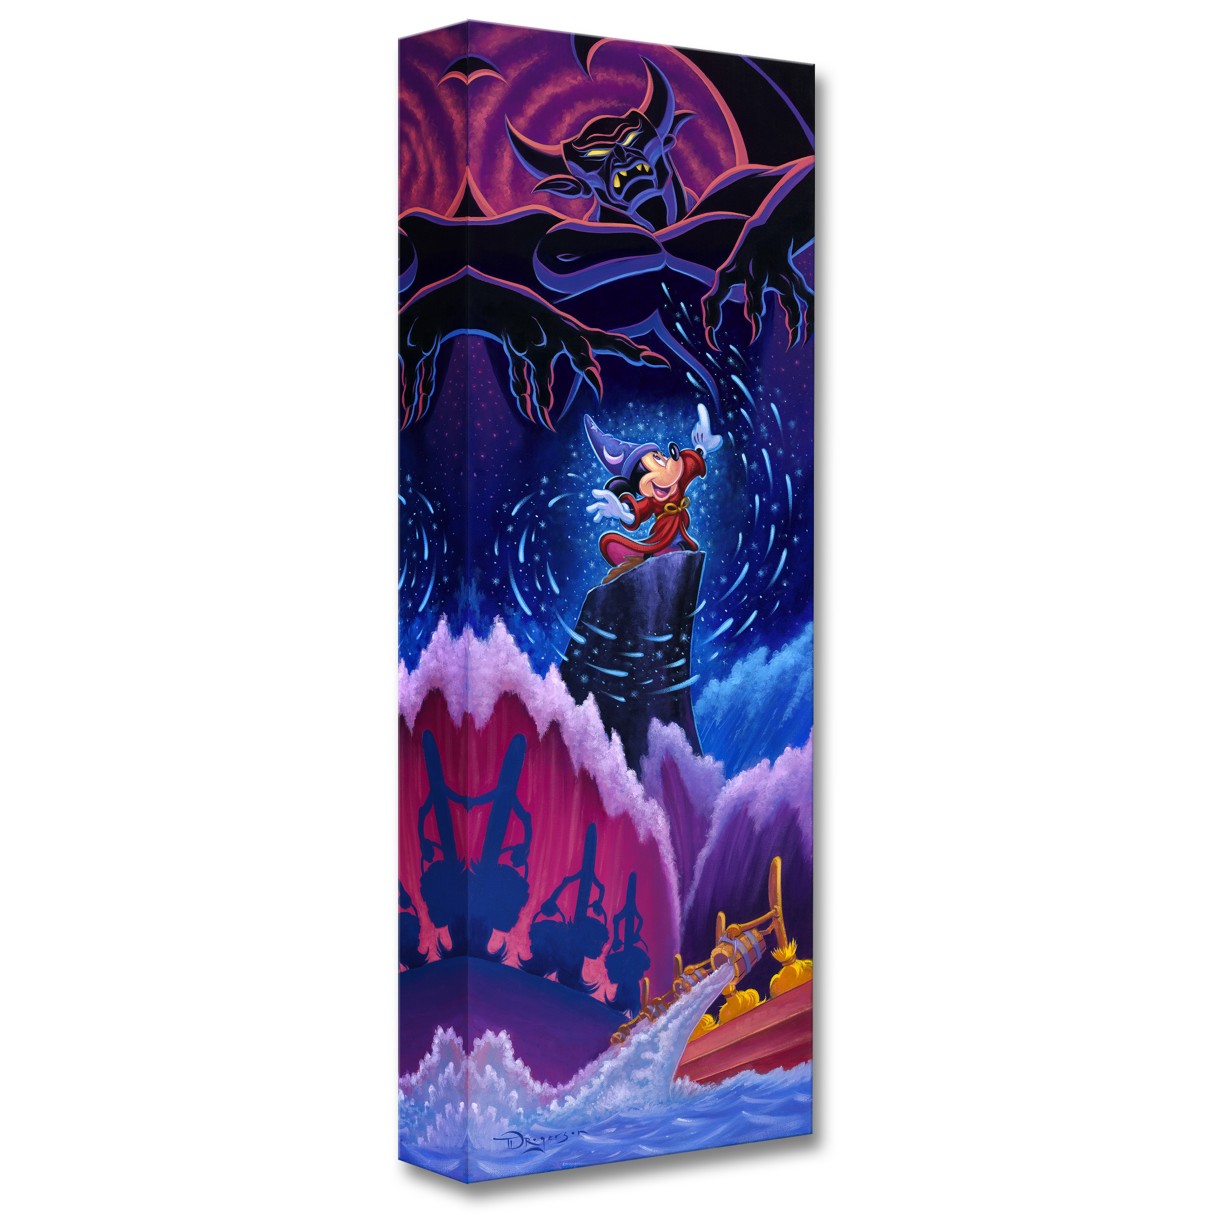 Sorcerer Mickey Mouse ''Triumph of Imagination'' Giclée by Tim Rogerson